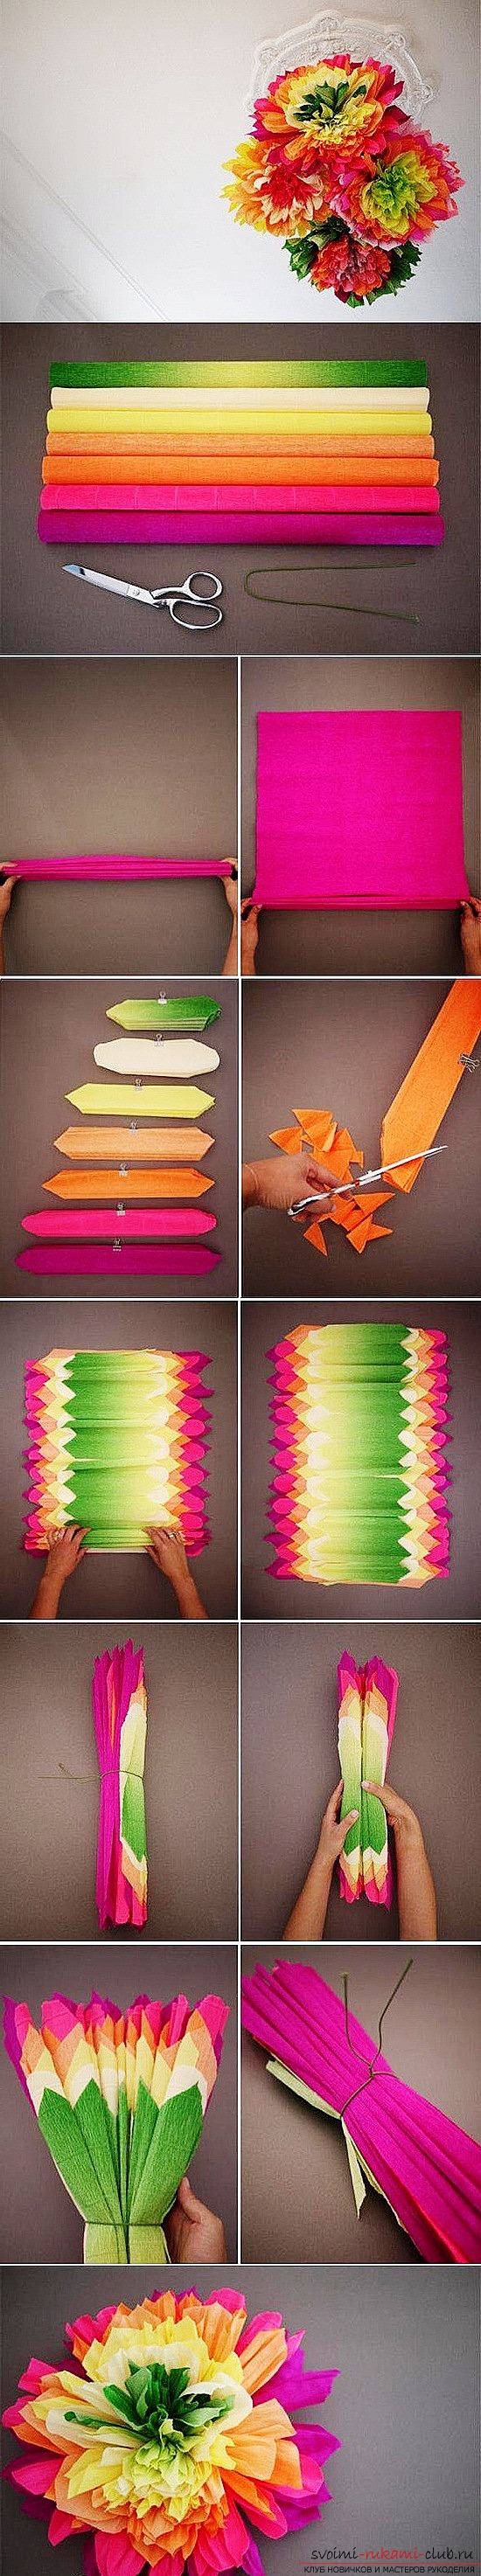 How to make flowers from corrugated paper? - Article with a step-by-step solution for creating colors from corrugated paper .. Photo # 1